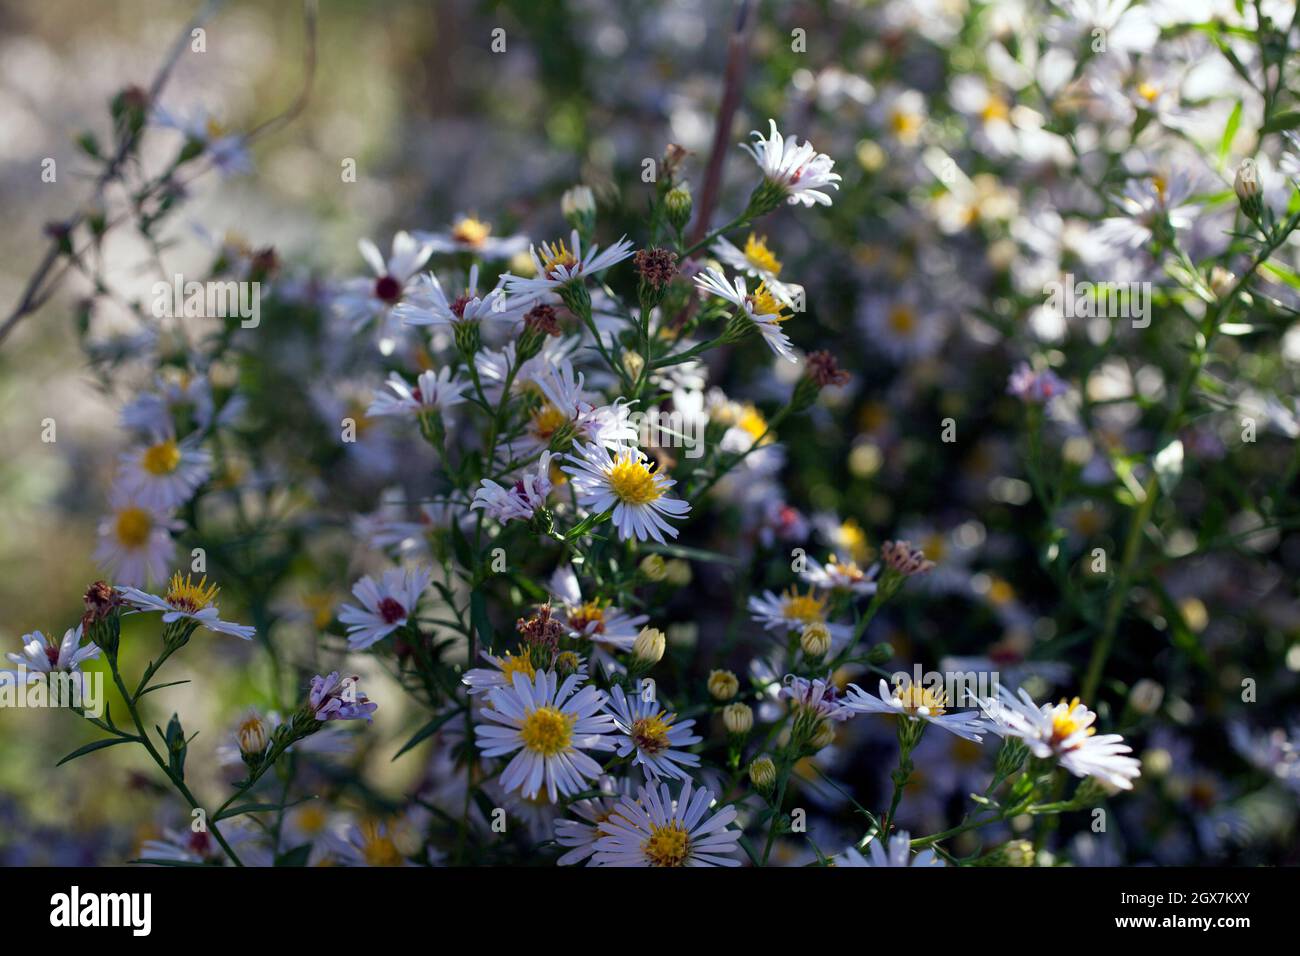 New York asters bloom in early fall, a native plant that attracts pollenaters. Stock Photo